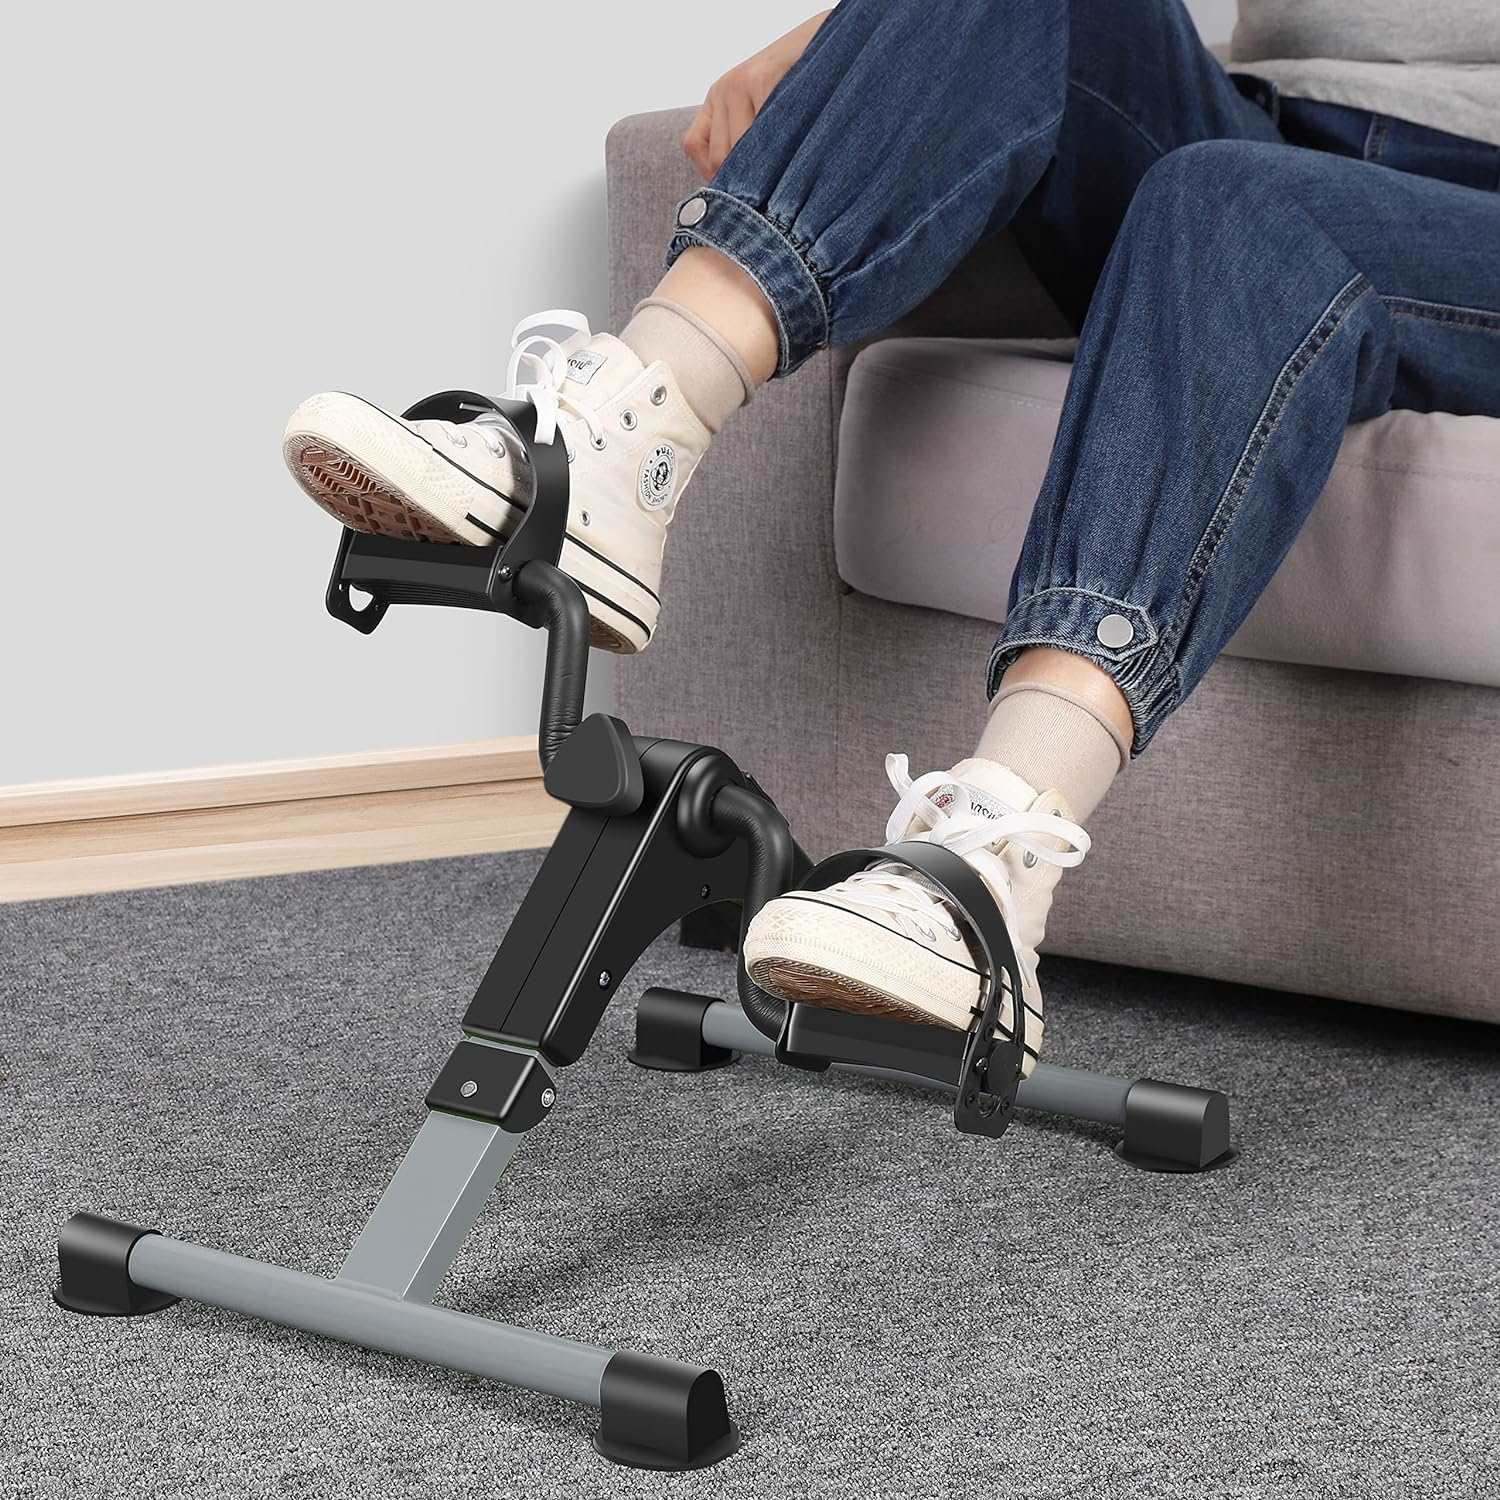 Foldable Under Desk Bike Pedal Exerciser with LCD Display